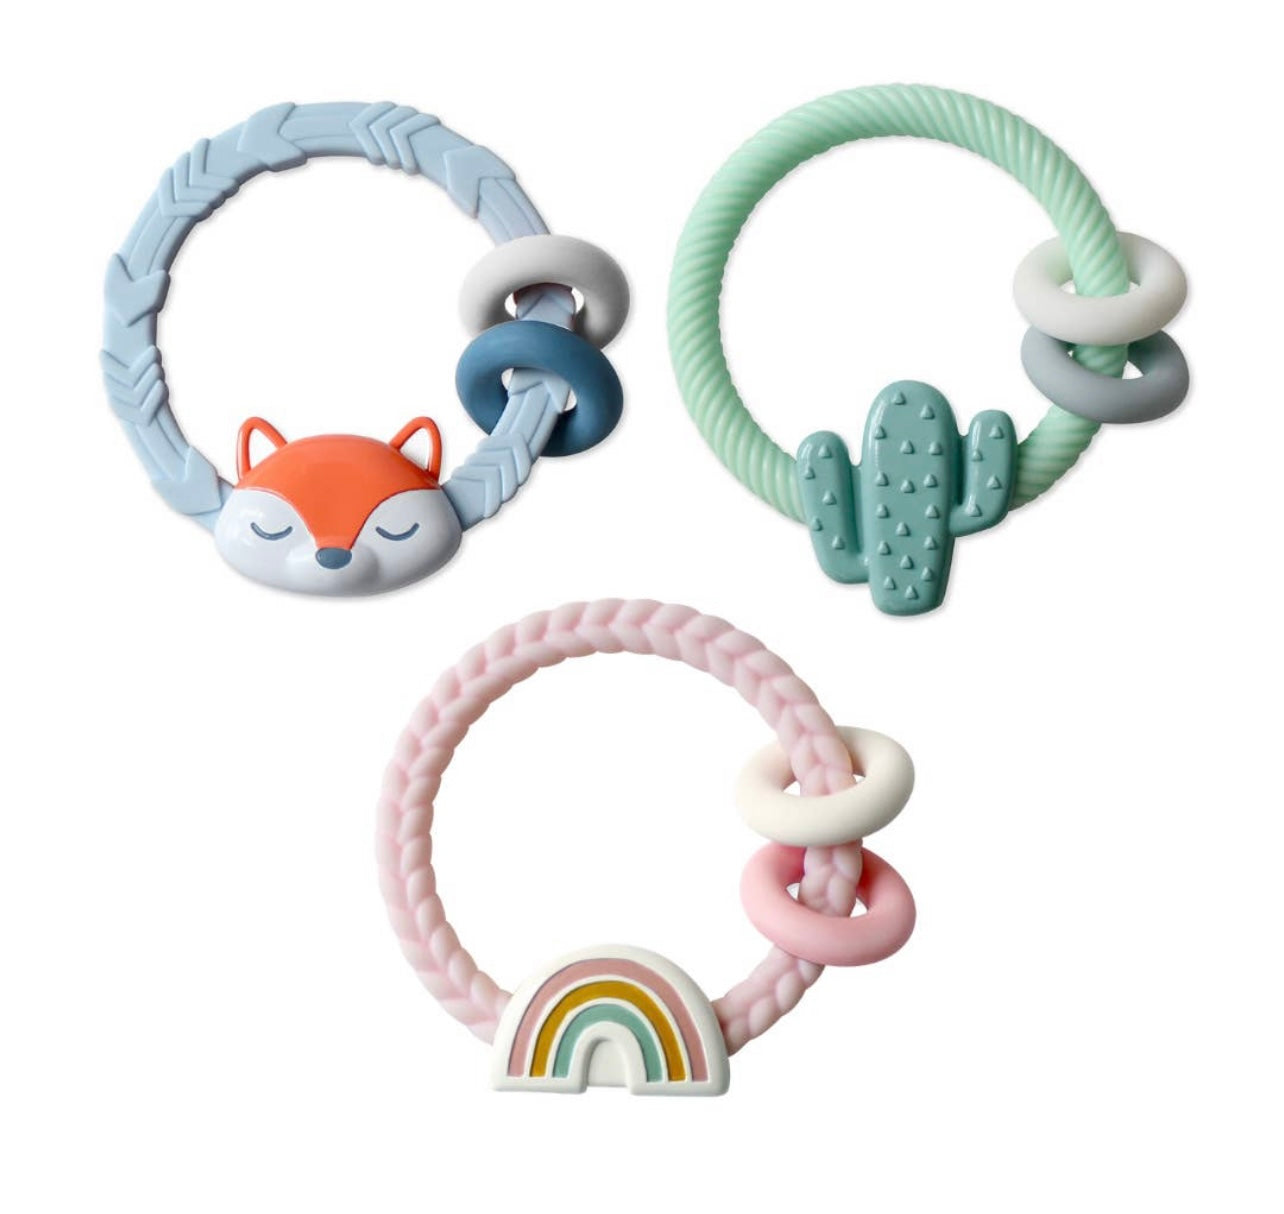 Ritzy Rattle Silicone Teether Rattle (5 colors)